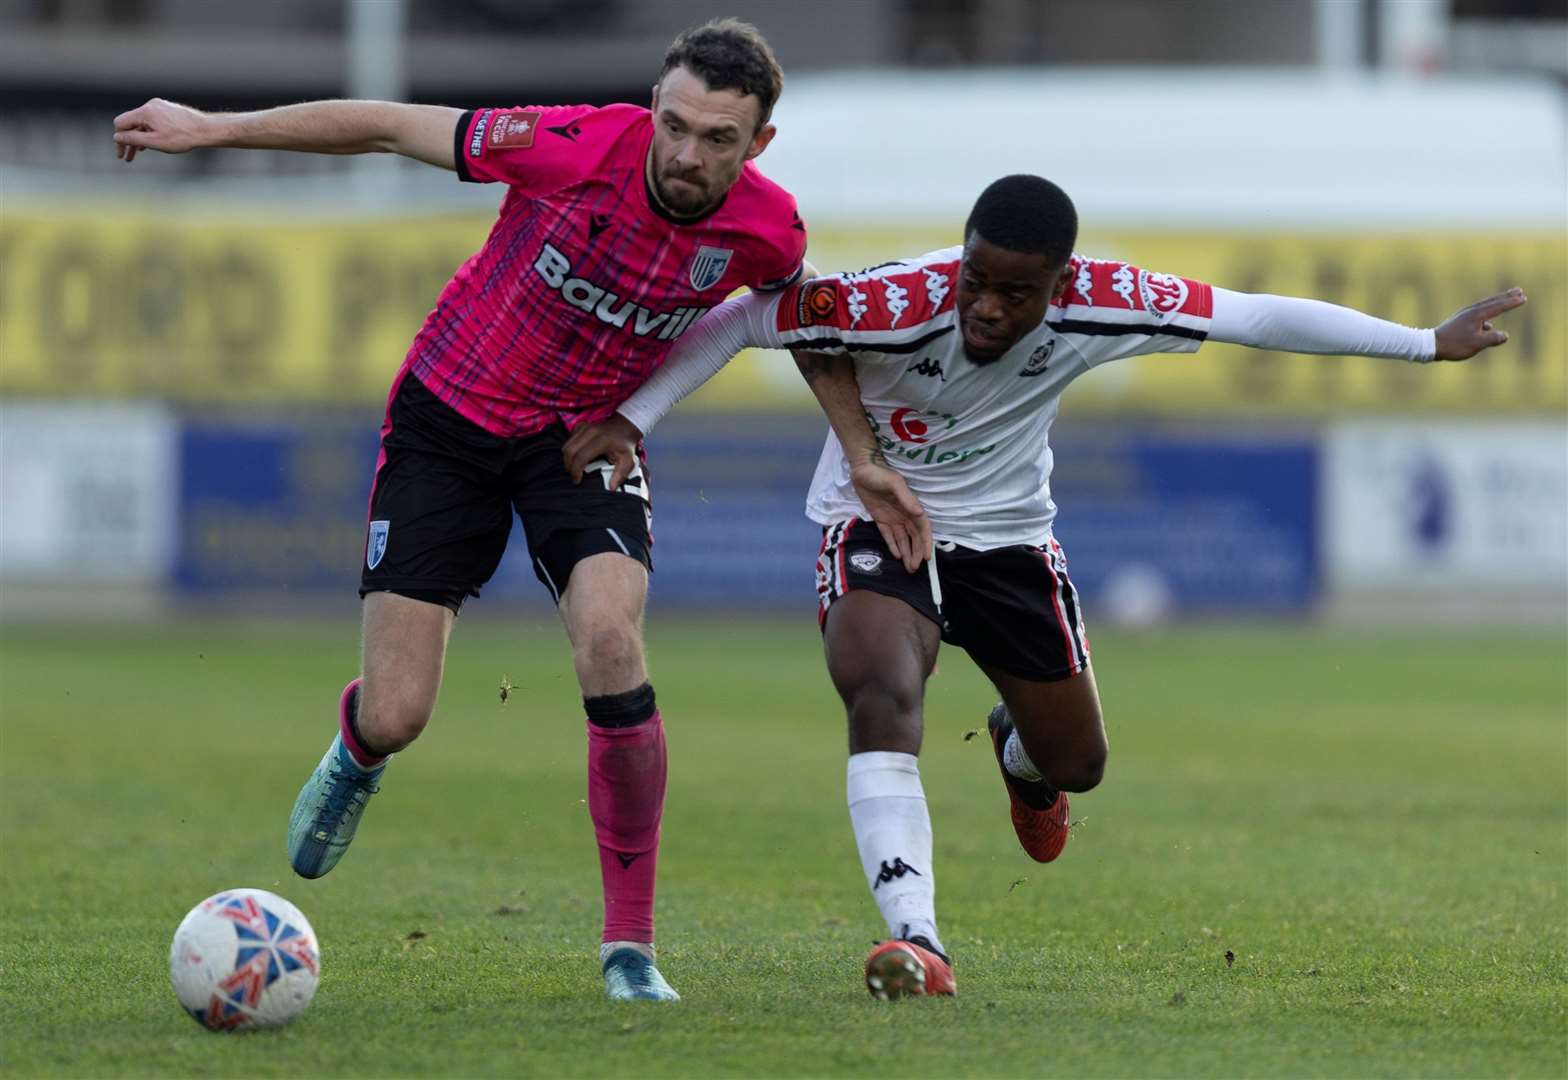 Gillingham’s Scott Malone battles for possession at Hereford in the FA Cup First Round. Picture: @Julian_KPI